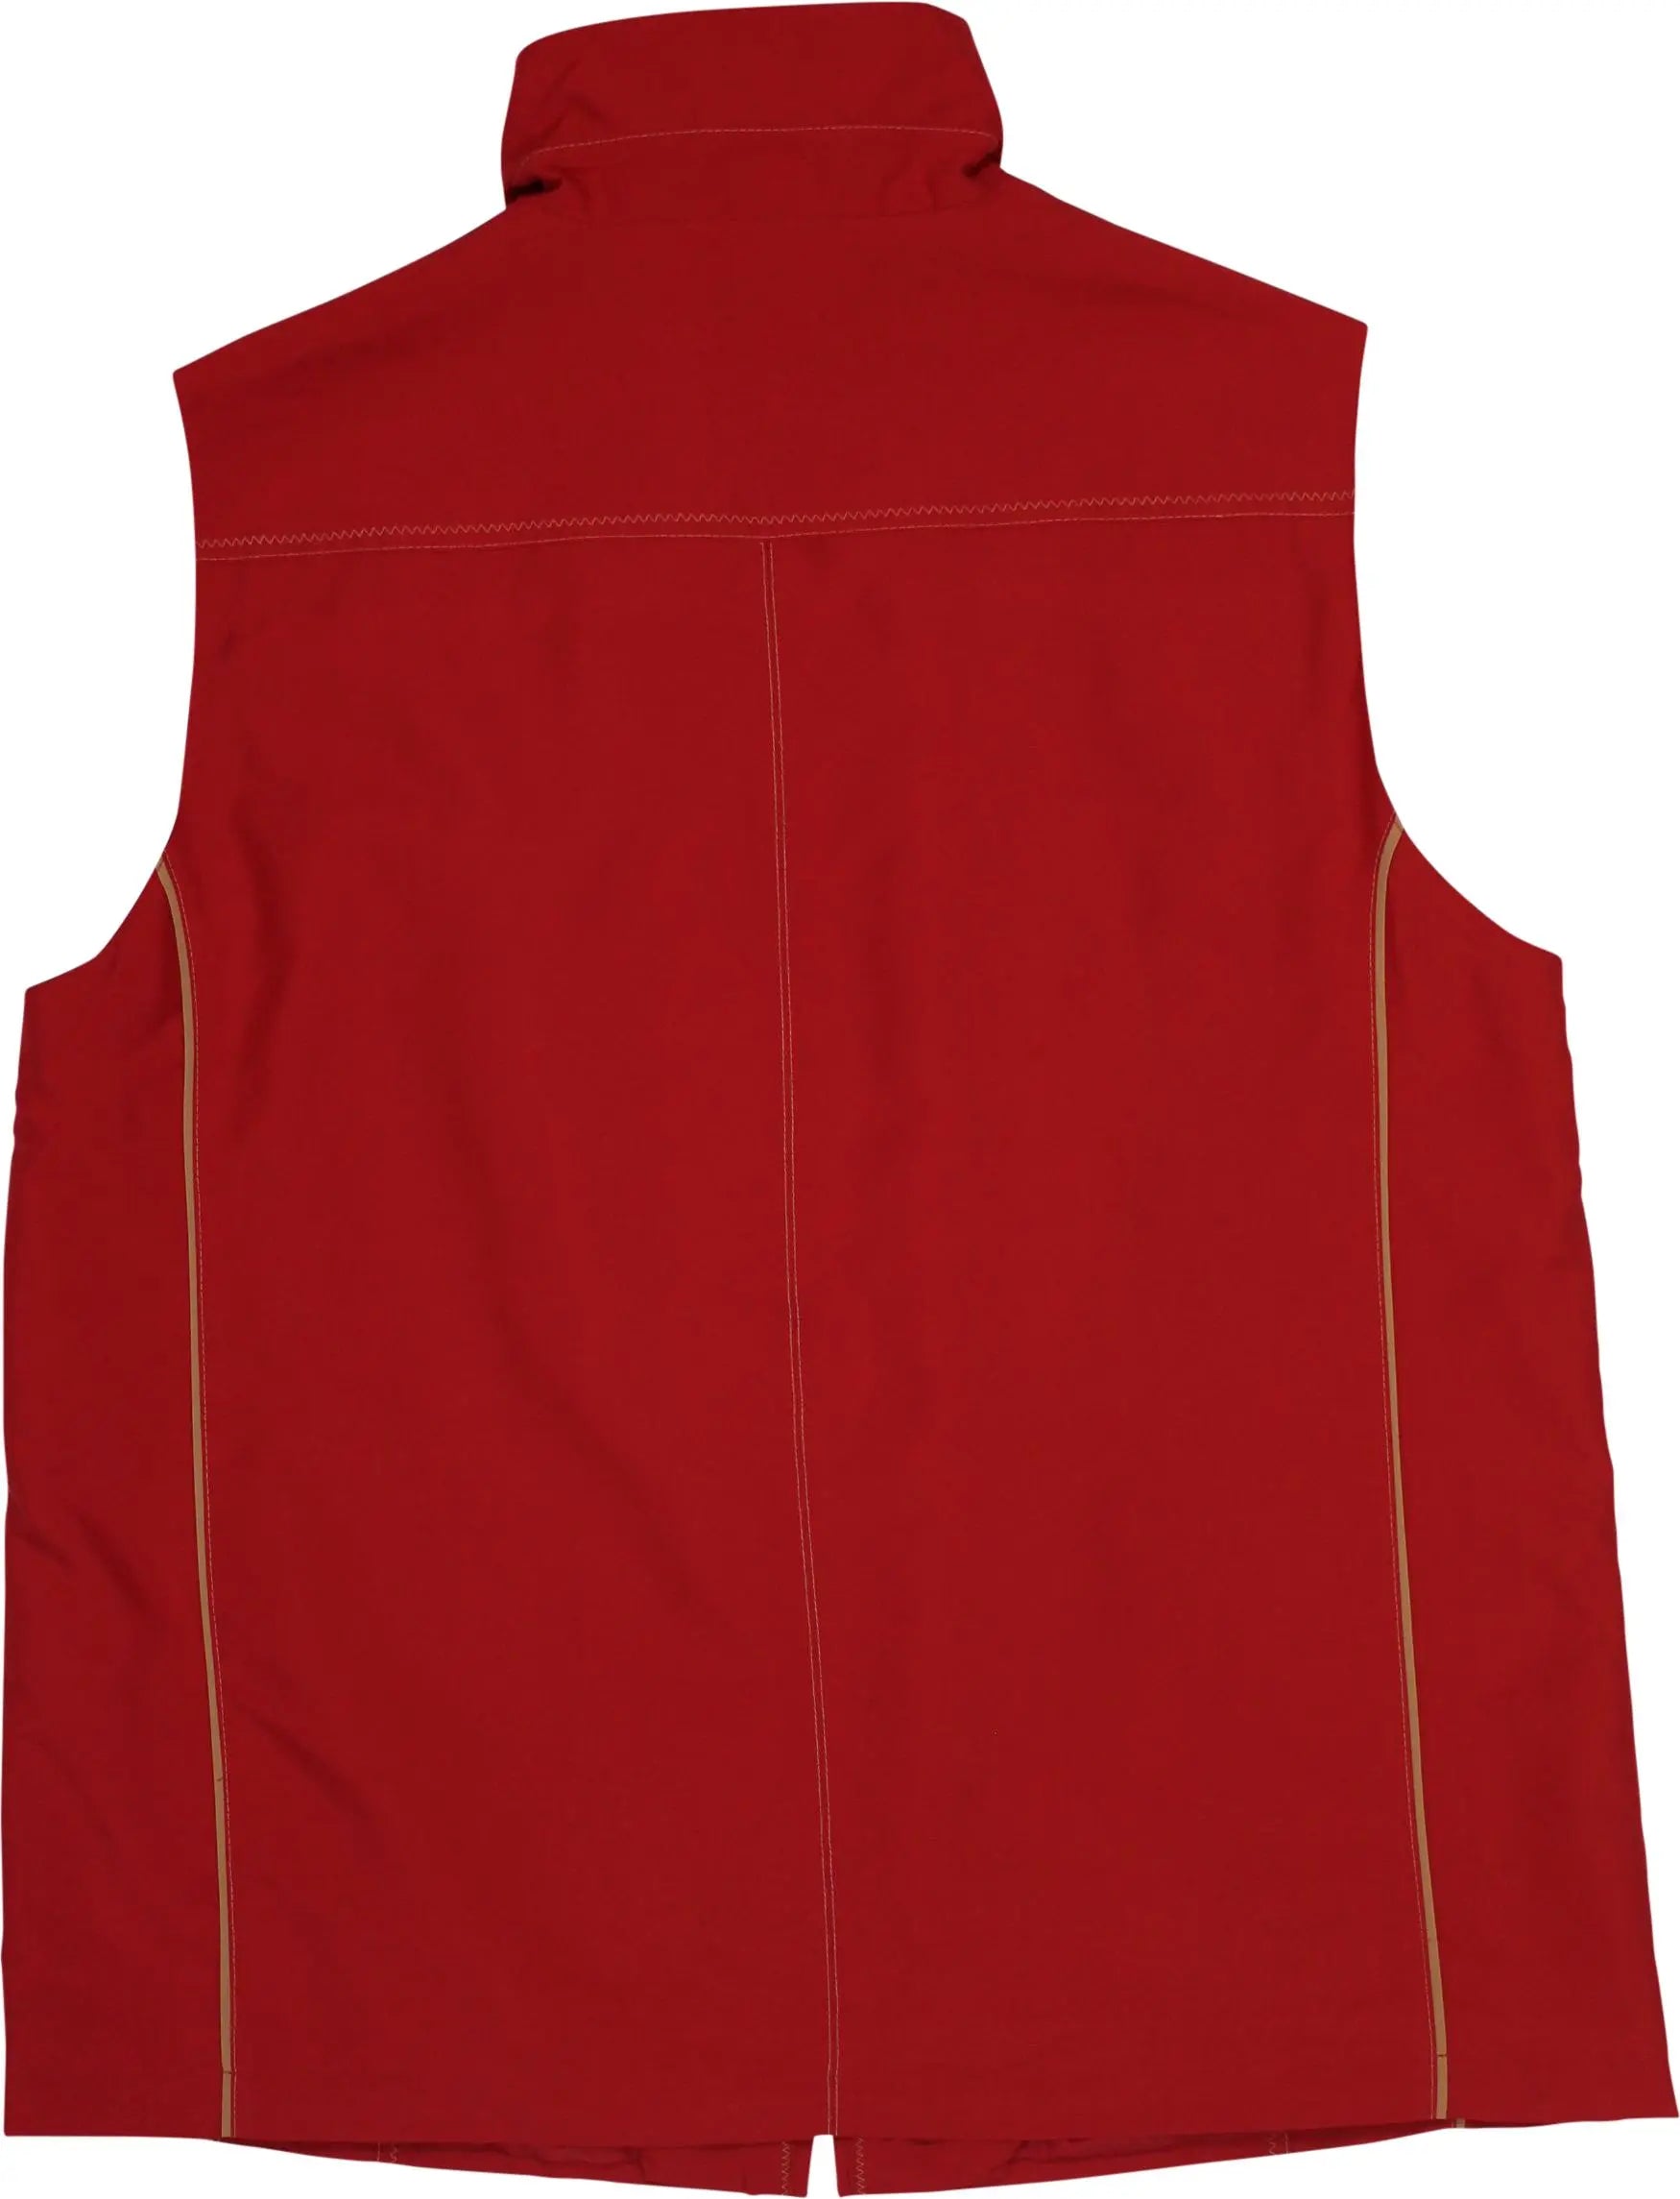 Unknown - Red Sleeveless Jacket- ThriftTale.com - Vintage and second handclothing